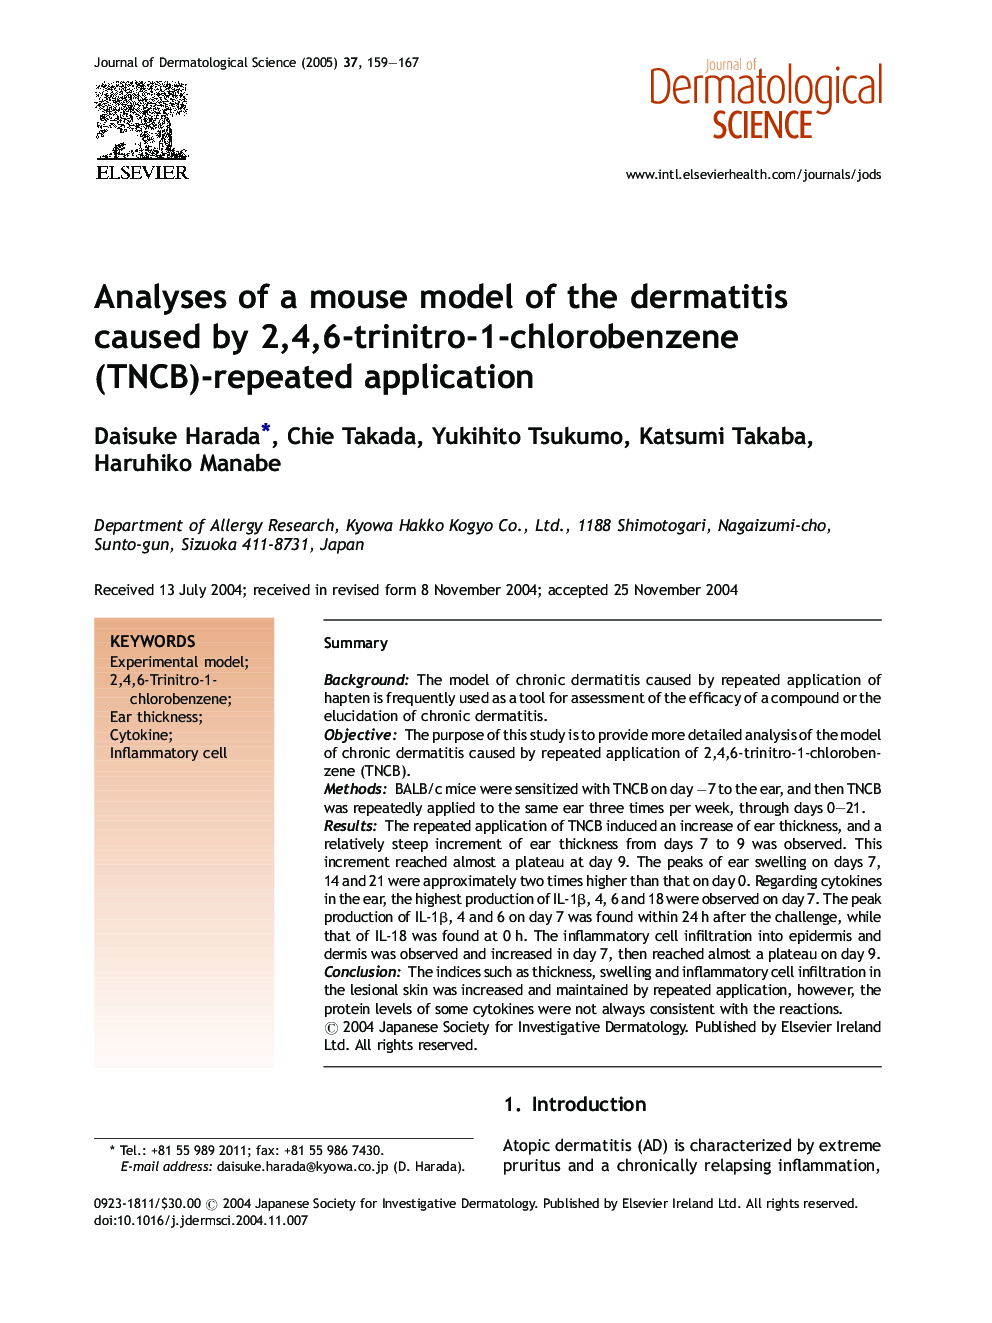 Analyses of a mouse model of the dermatitis caused by 2,4,6-trinitro-1-chlorobenzene (TNCB)-repeated application